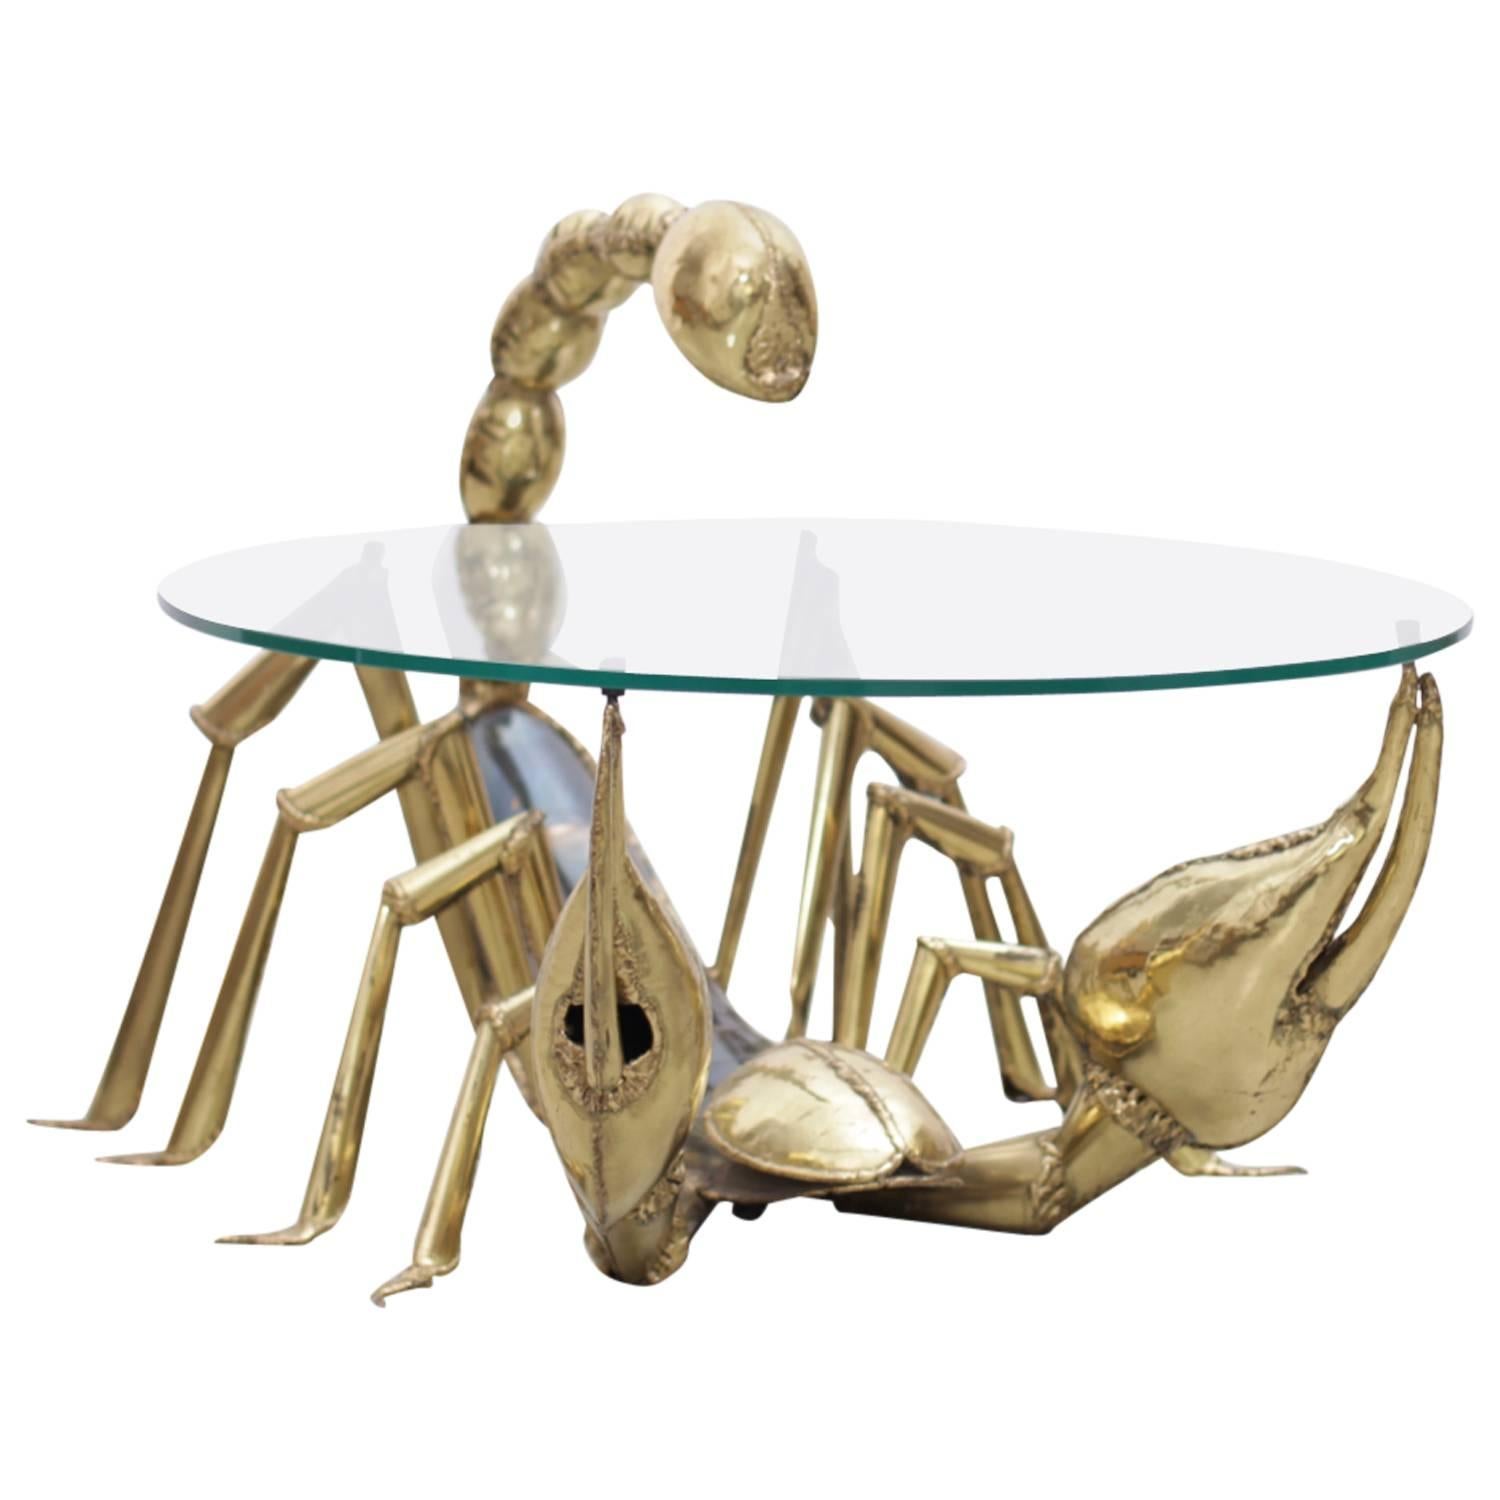 Rare Illuminated Brass Scorpion Coffee Table by Jacques Duval-Brasseur